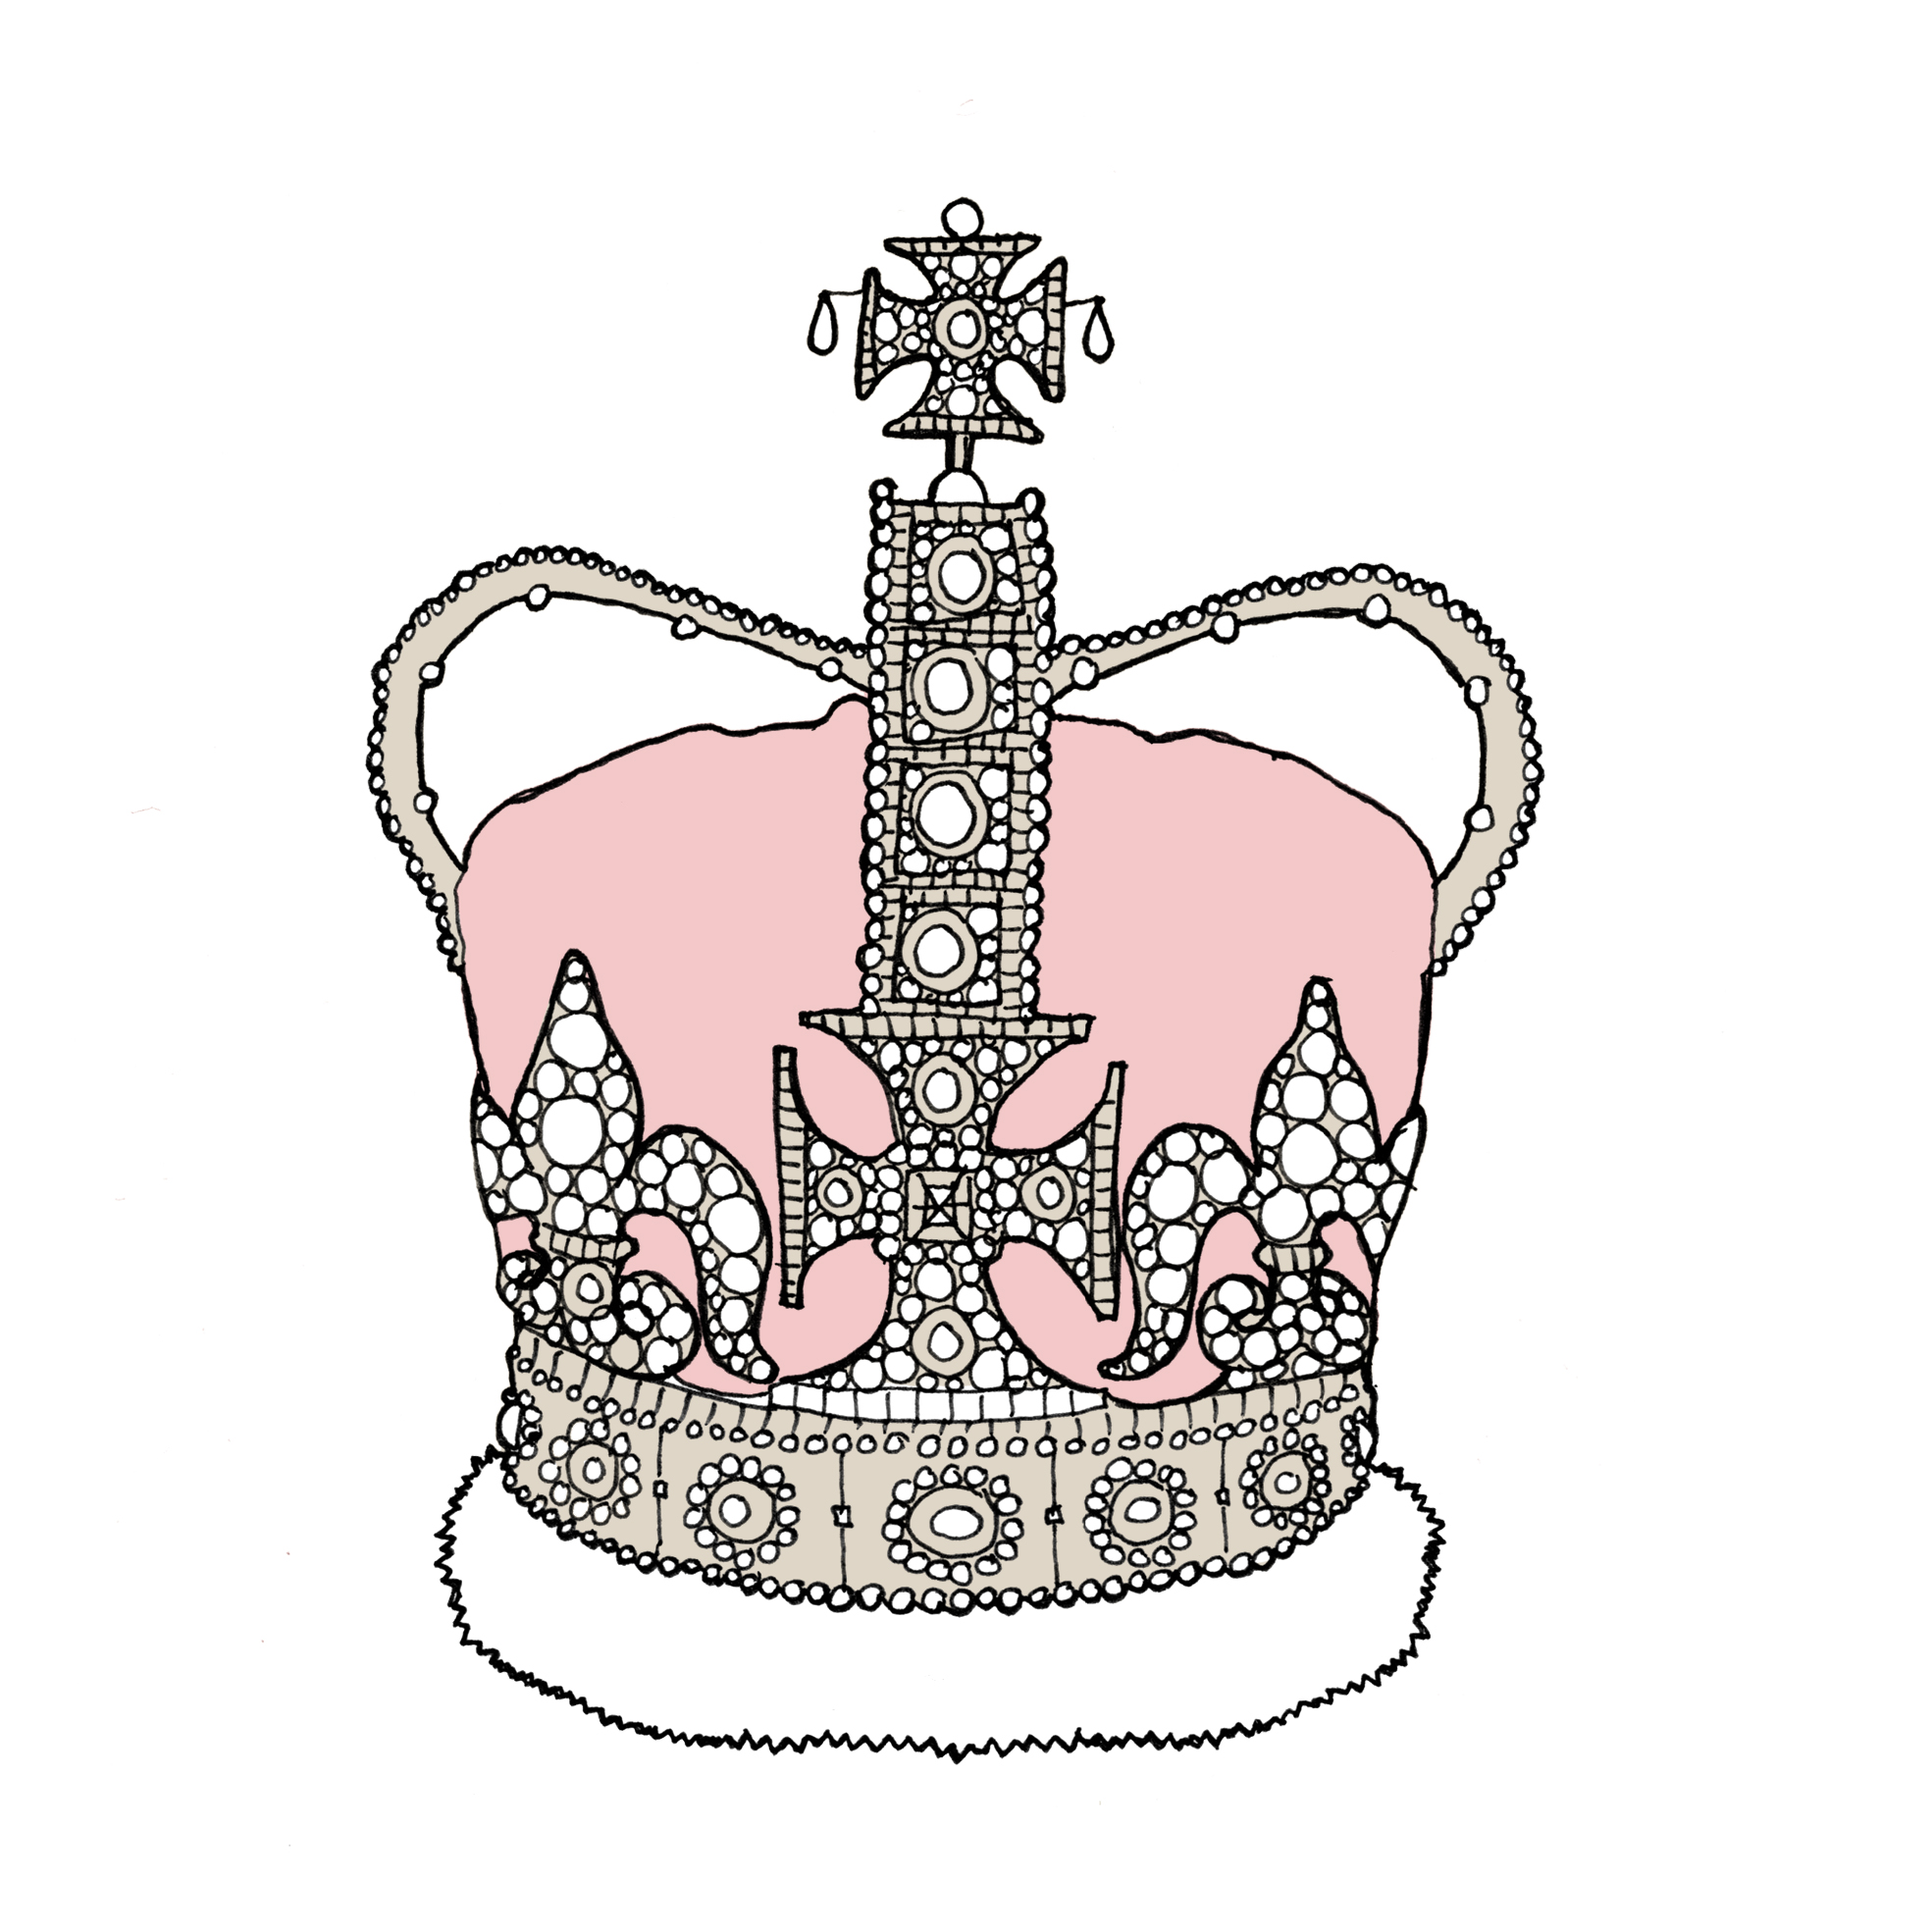 Simple Princess Crown.drawing - ClipArt Best